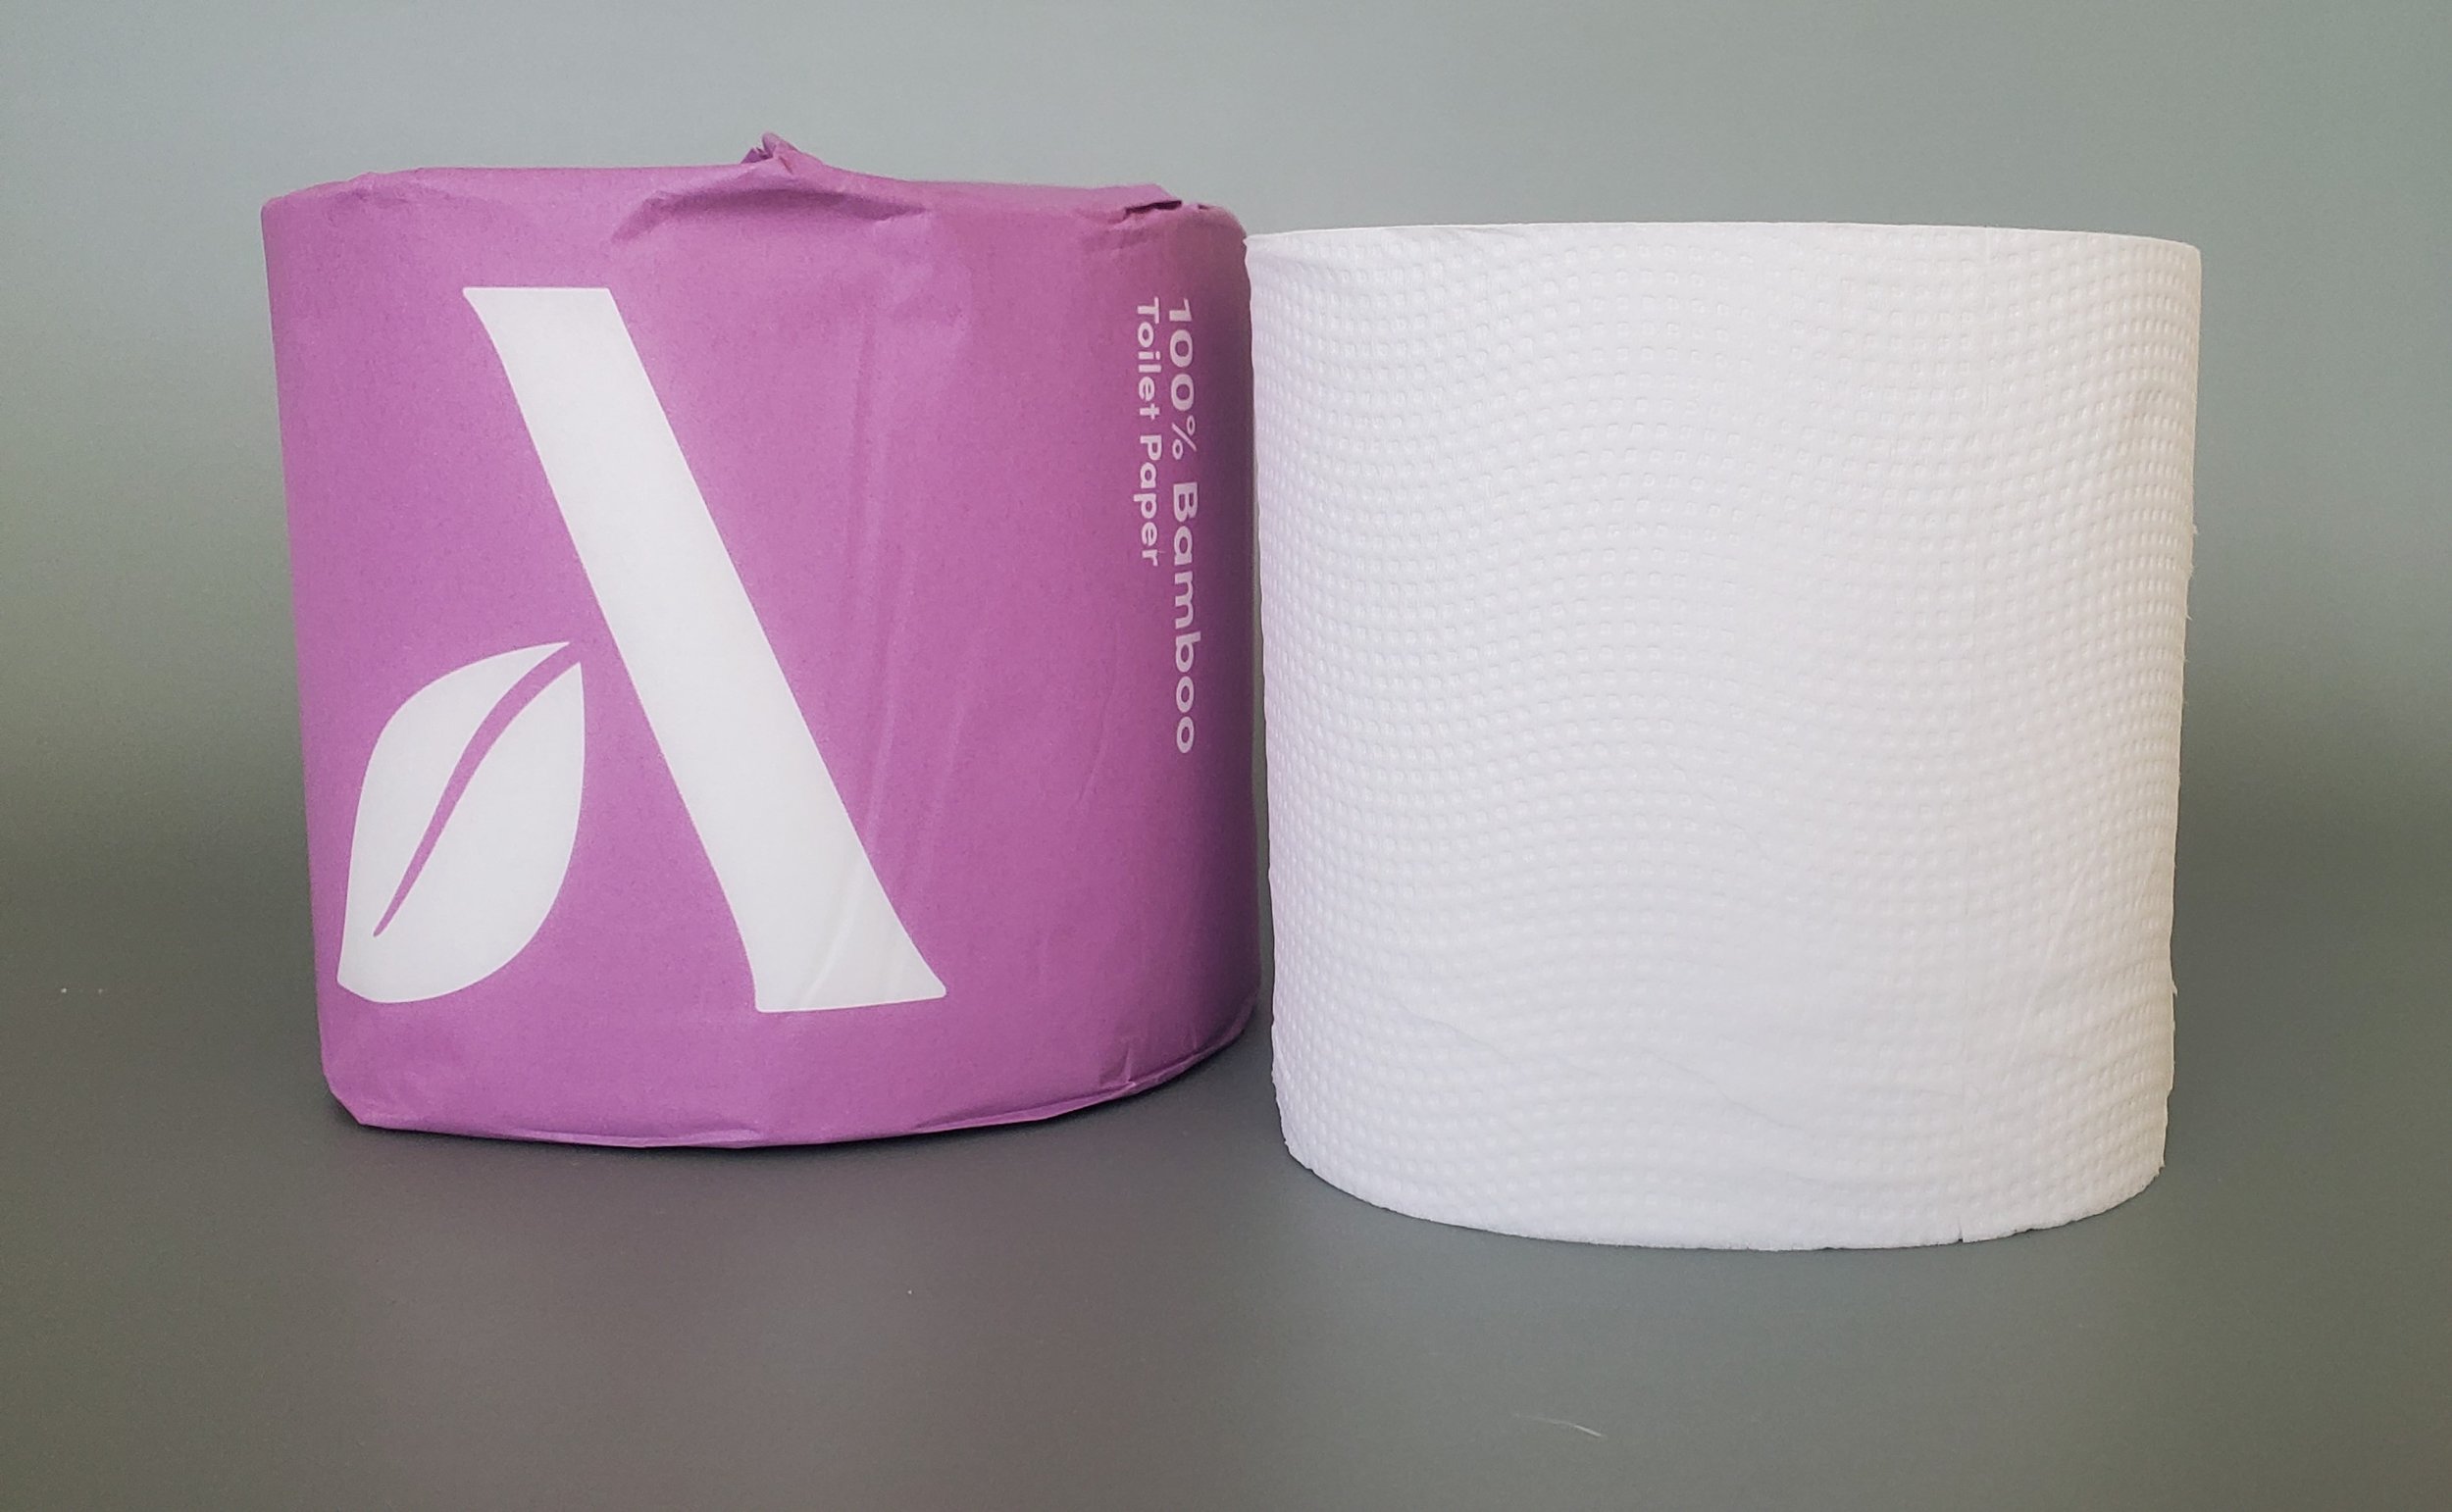 TRR wiped with  Aware 100pct Bamboo Toilet Paper. Here's our